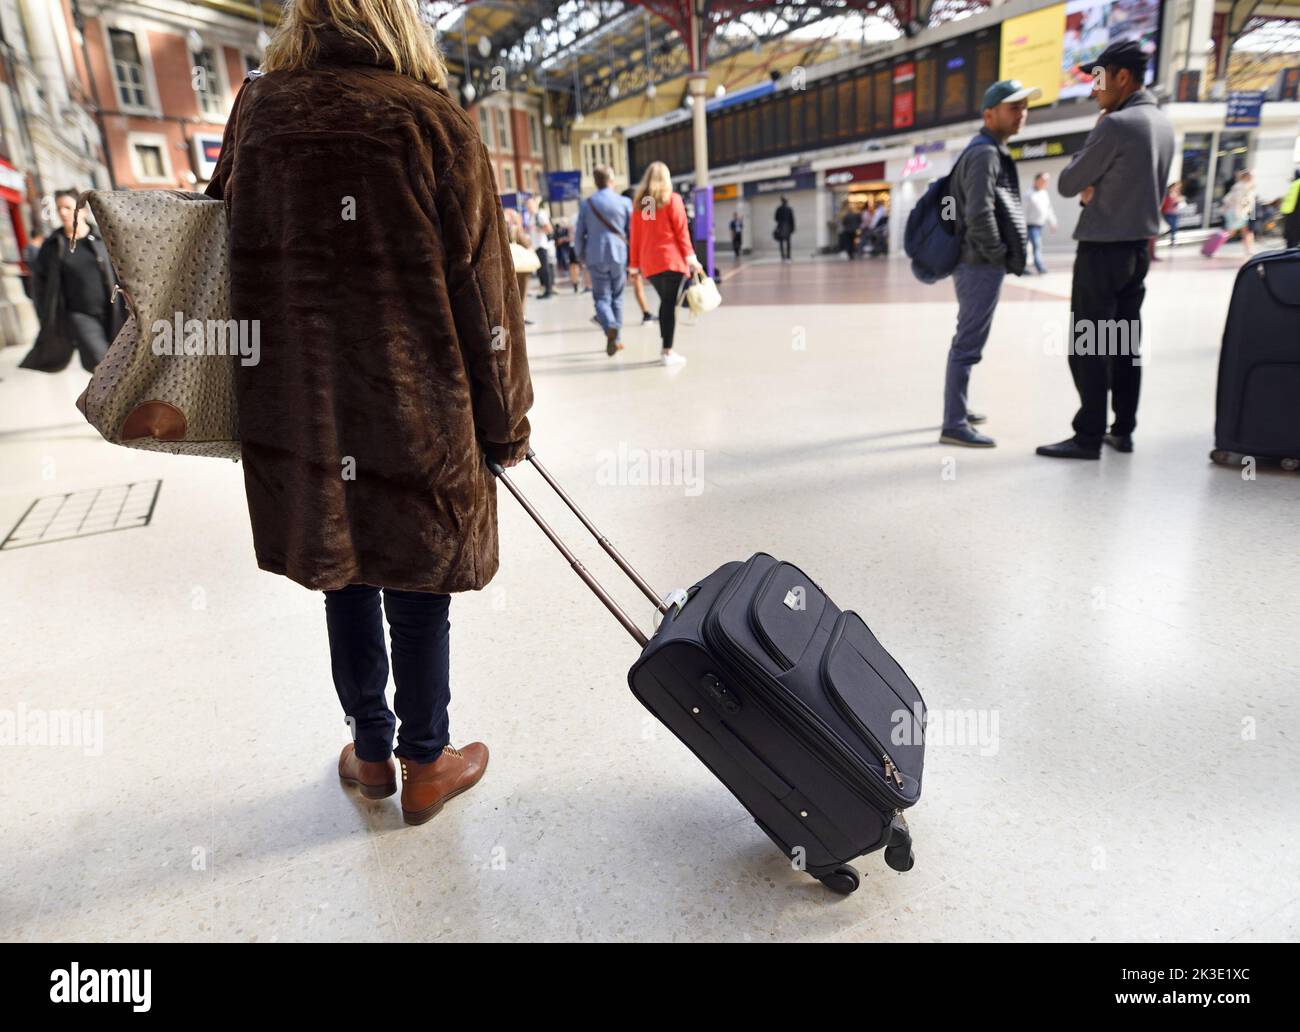 London, England, UK. Victoria Station - woman with luggage Stock Photo